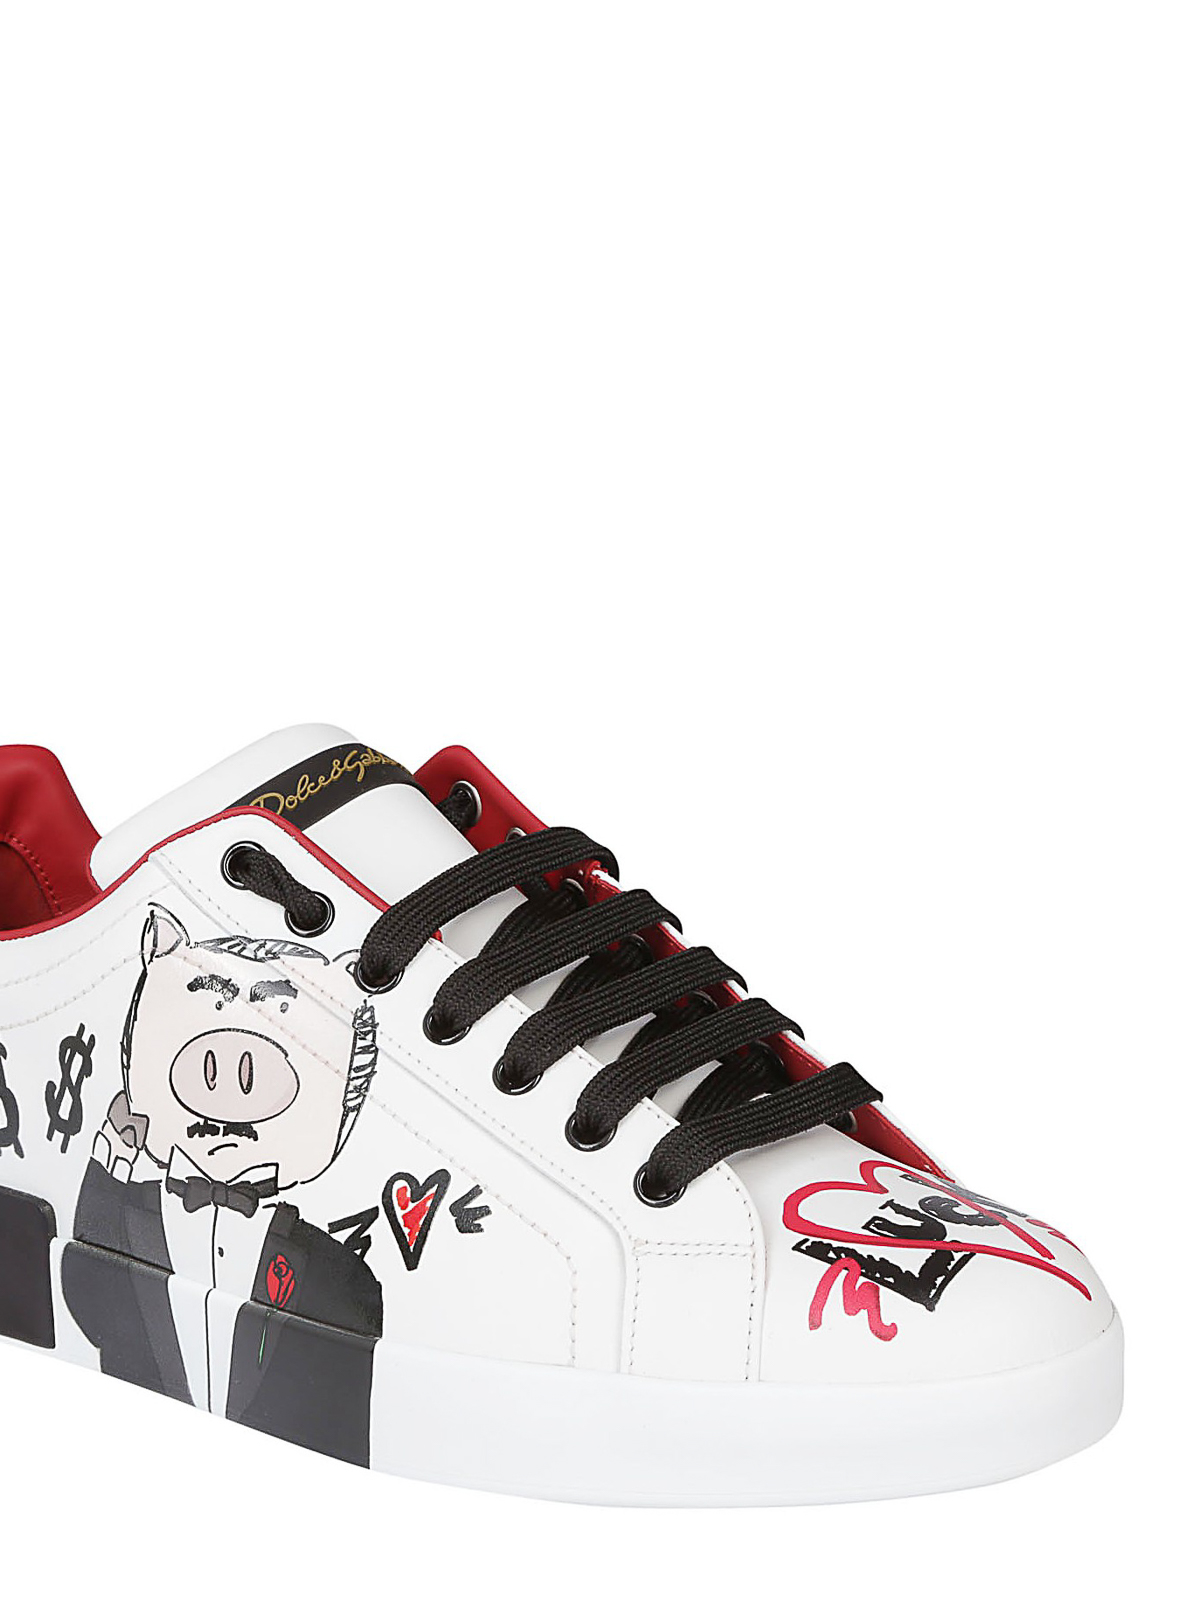 dolce and gabbana sneakers sale